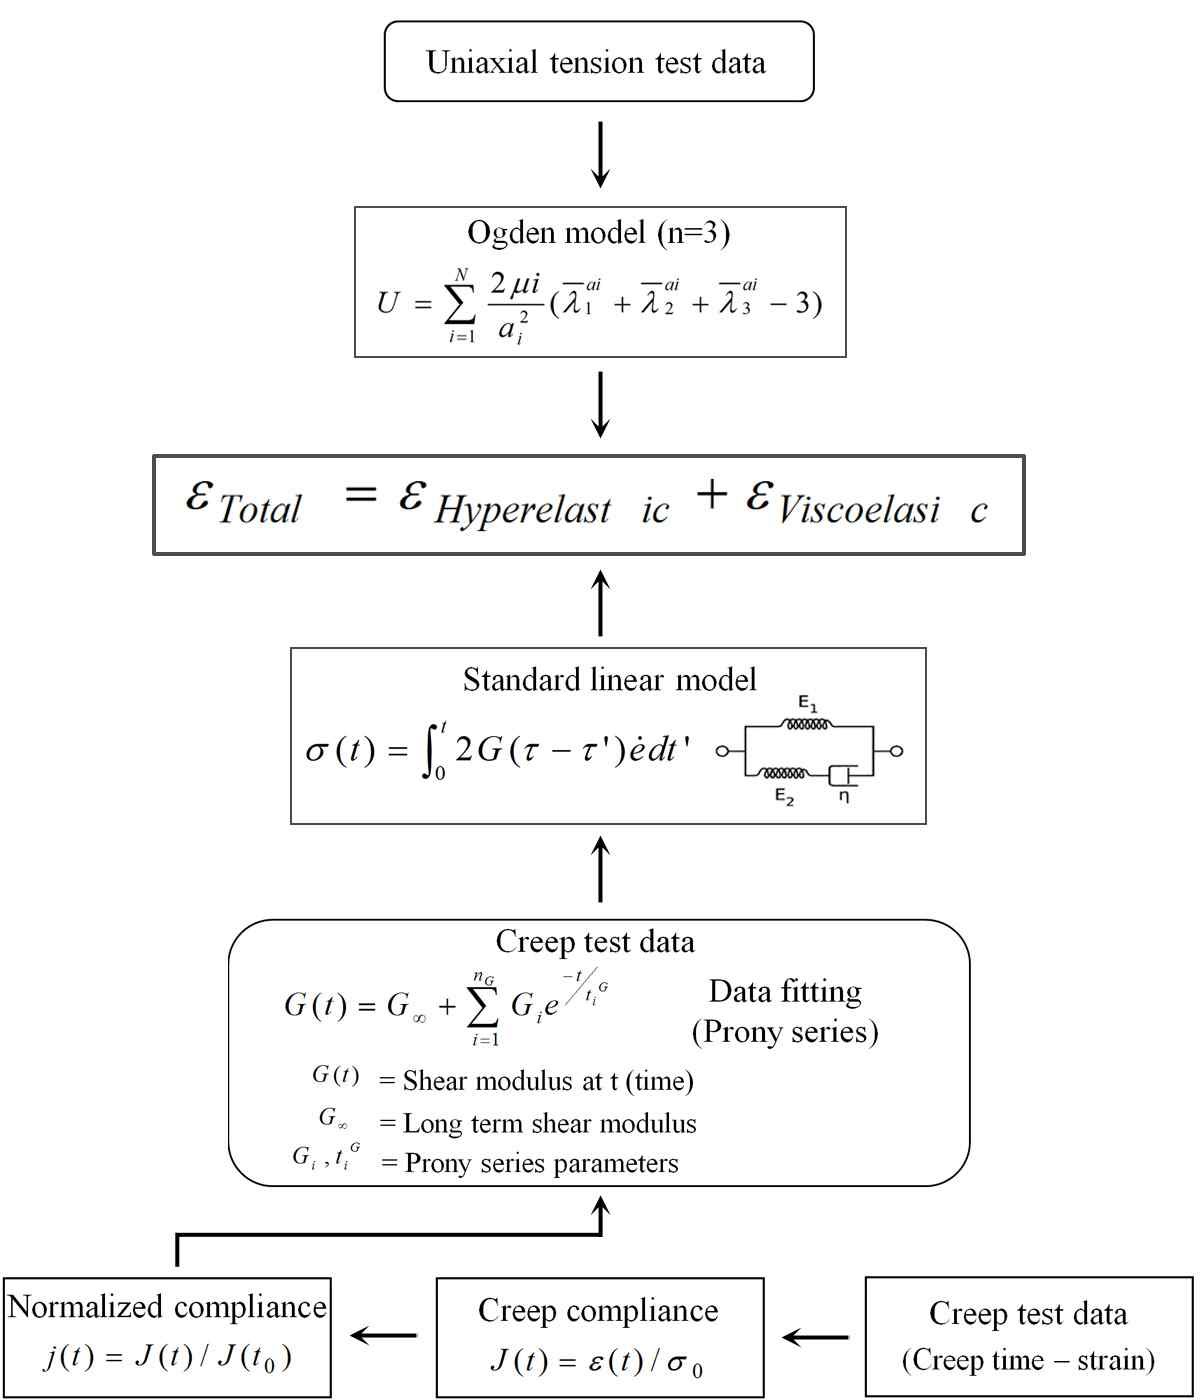 The scheme of calculation process for the total strain